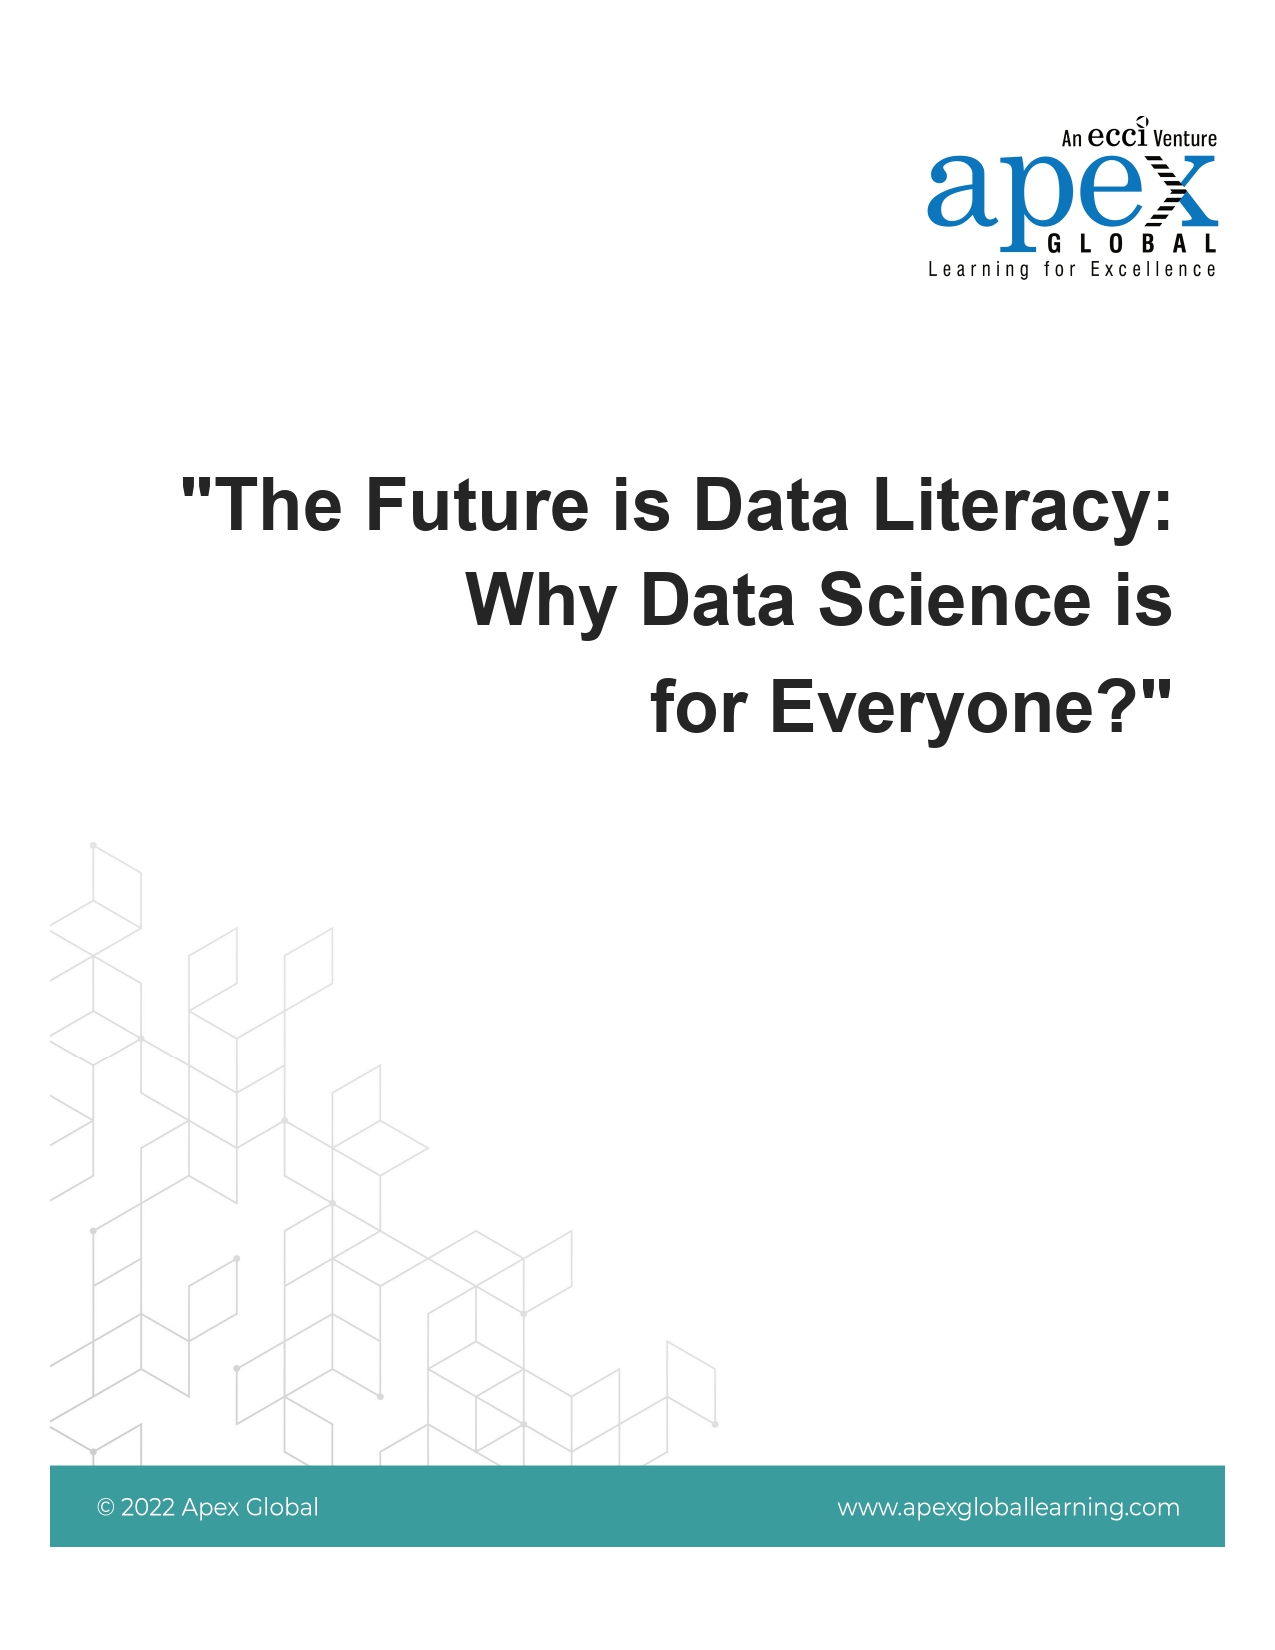 The Future is Data Literacy Why Data Science is for Everyone_page-0001